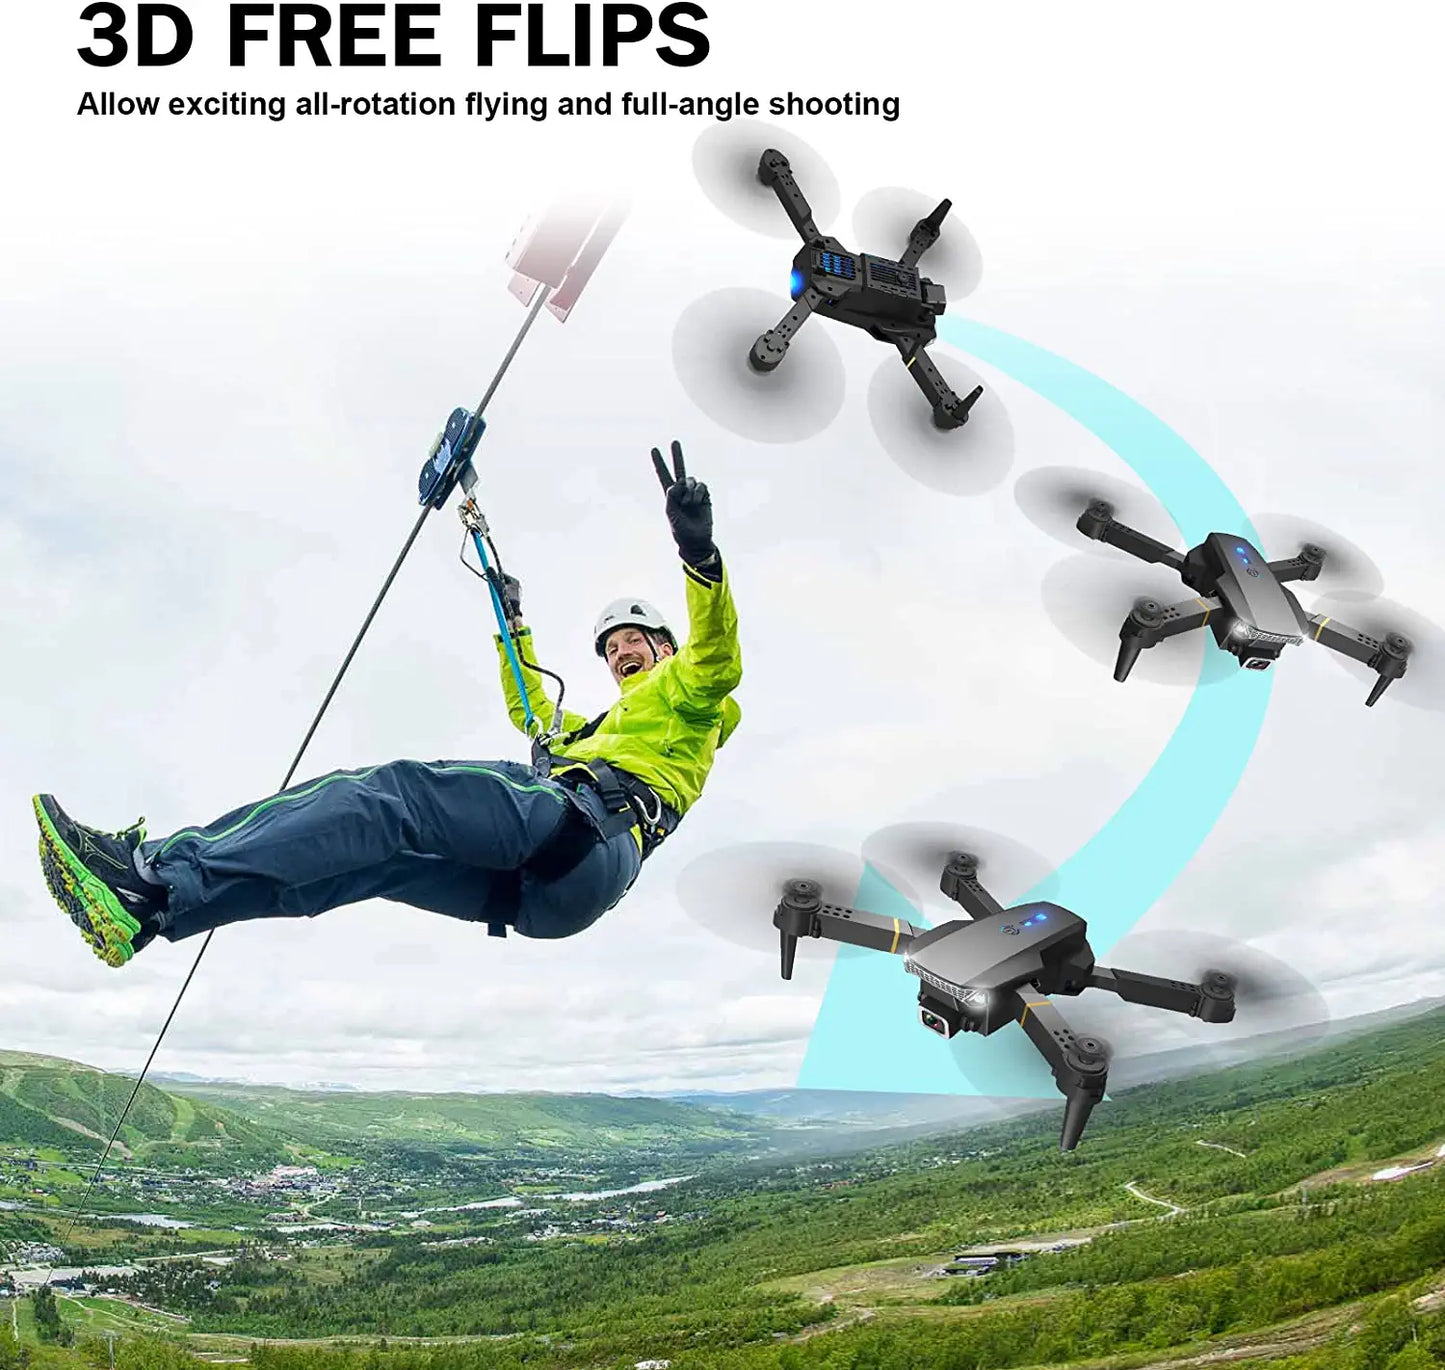 Wipkviey T27 Drone - with 3 Batteries 360° Flip, Altitude Hold, Headless Mode, One Key Take off/Landing Foldable Drone - RCDrone